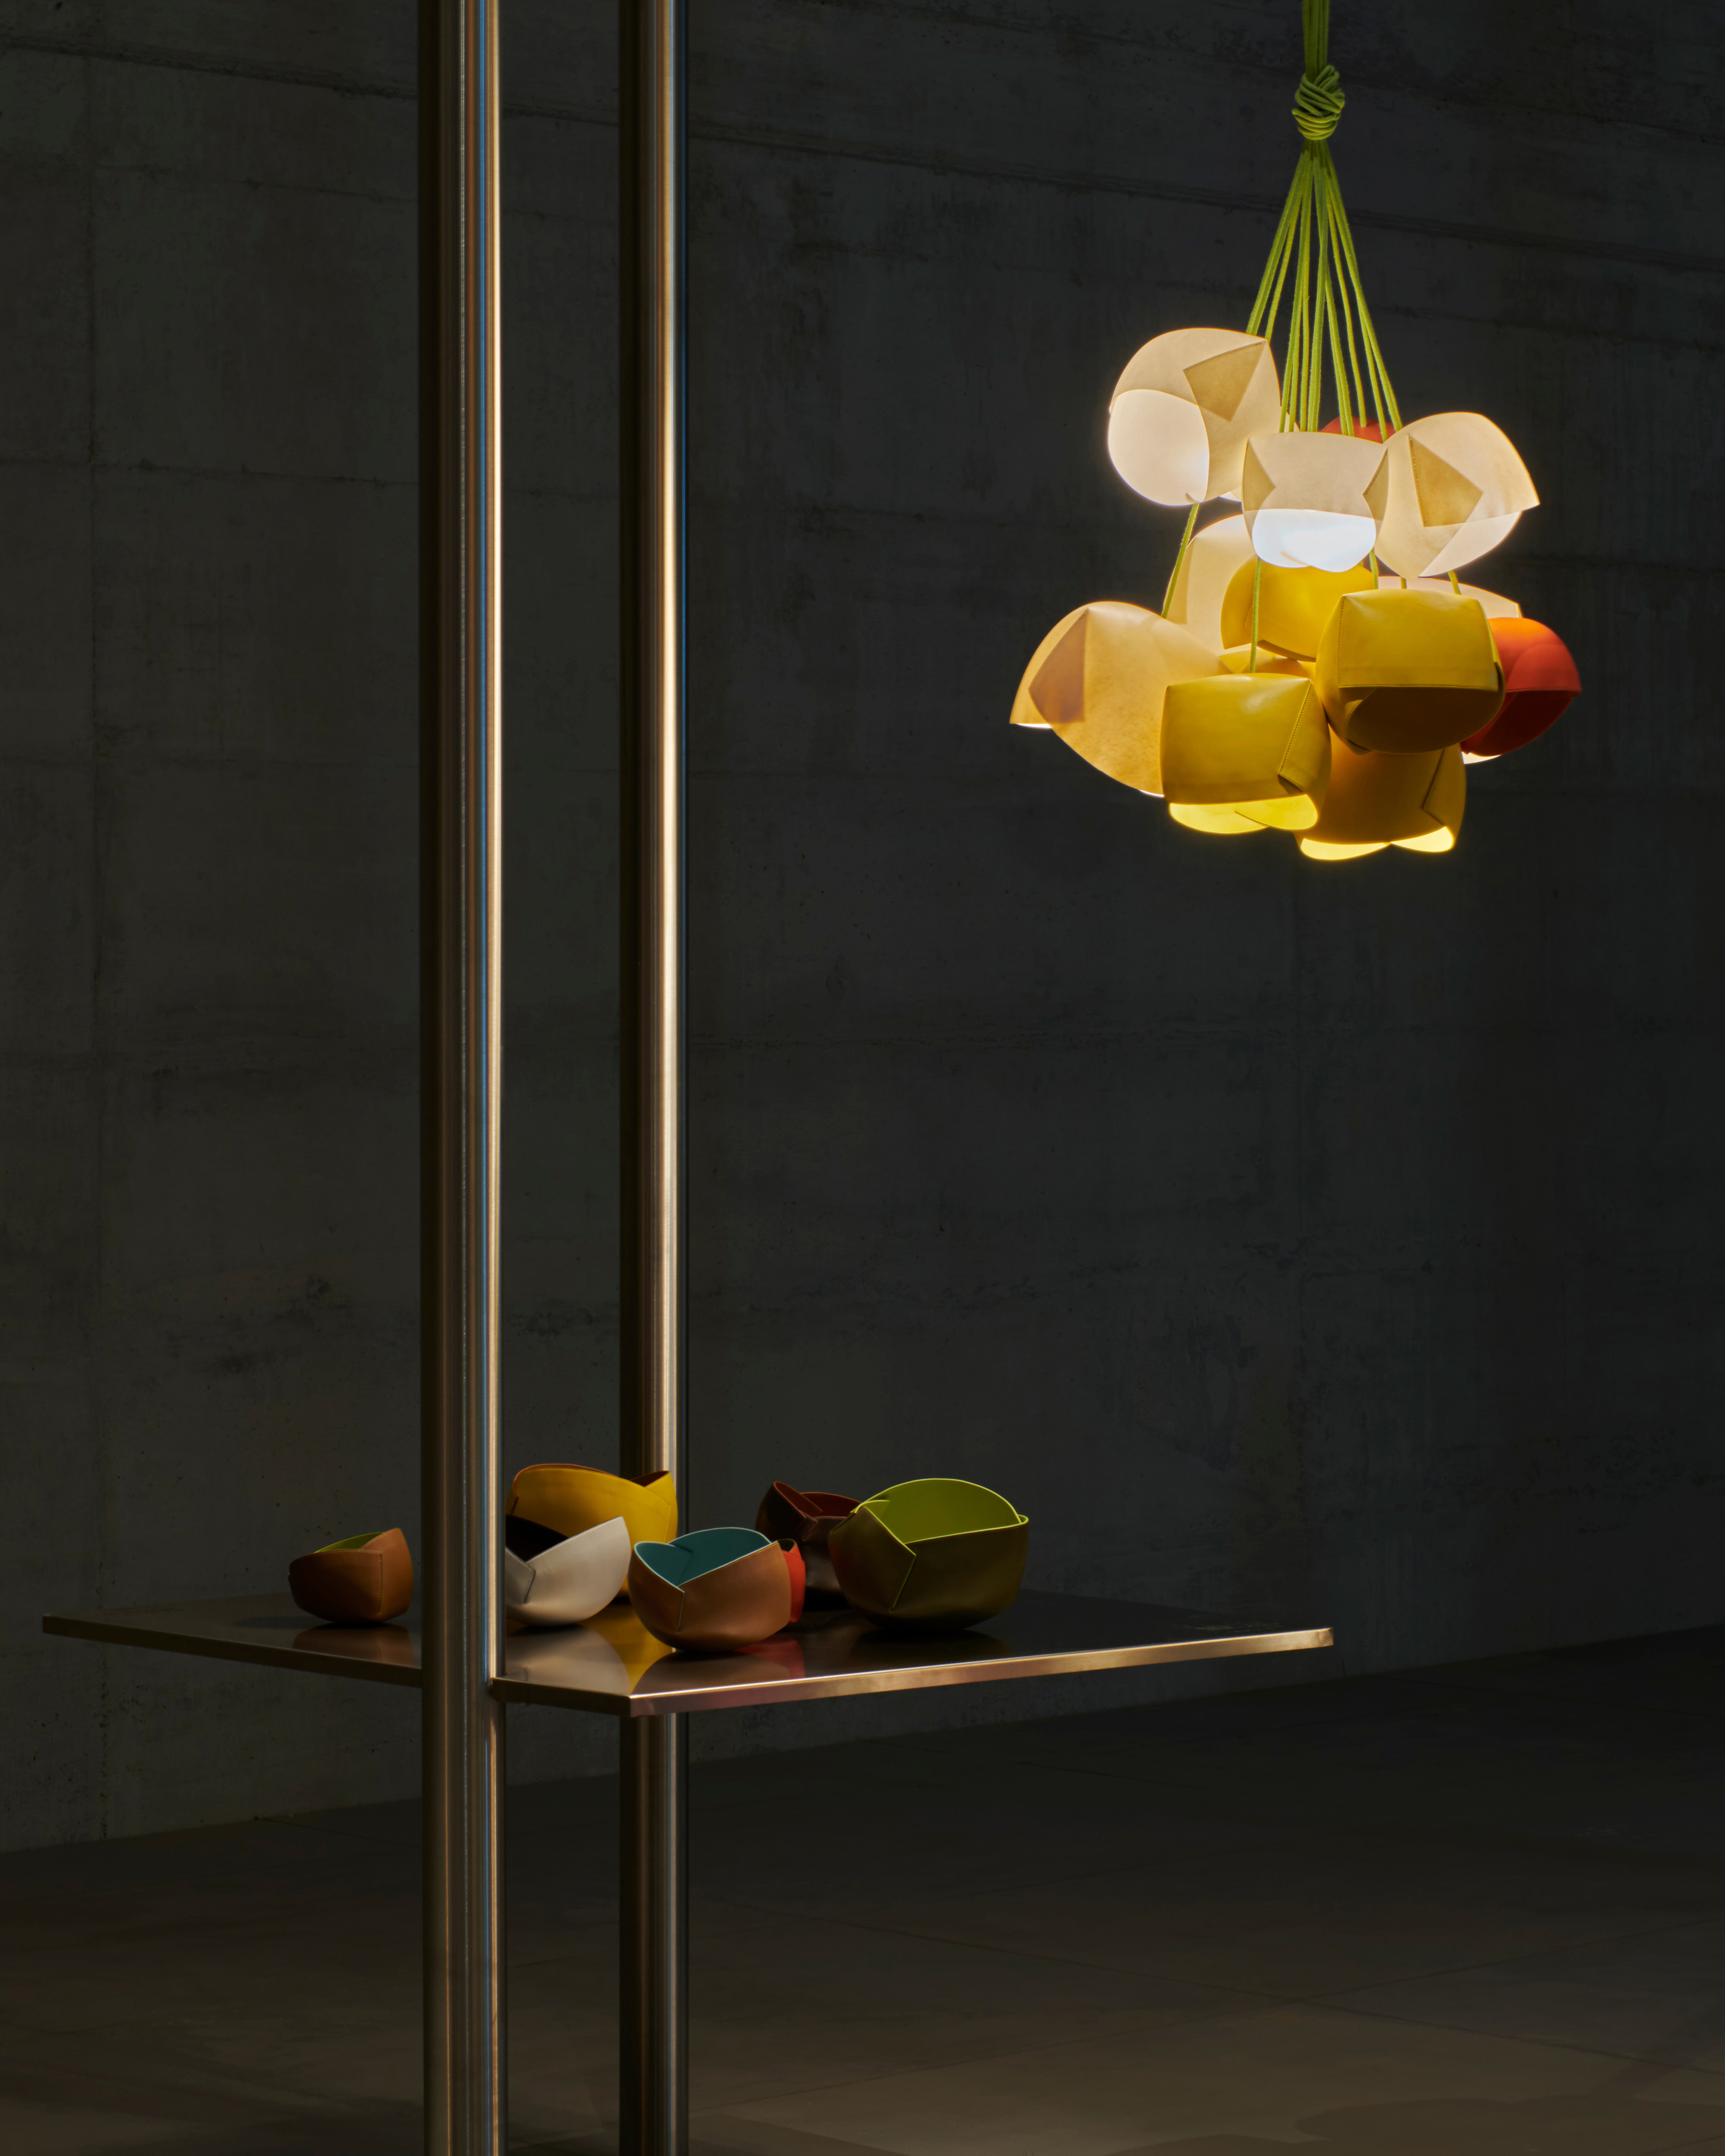 Loewe Lamps installation at Salone Del Mobile